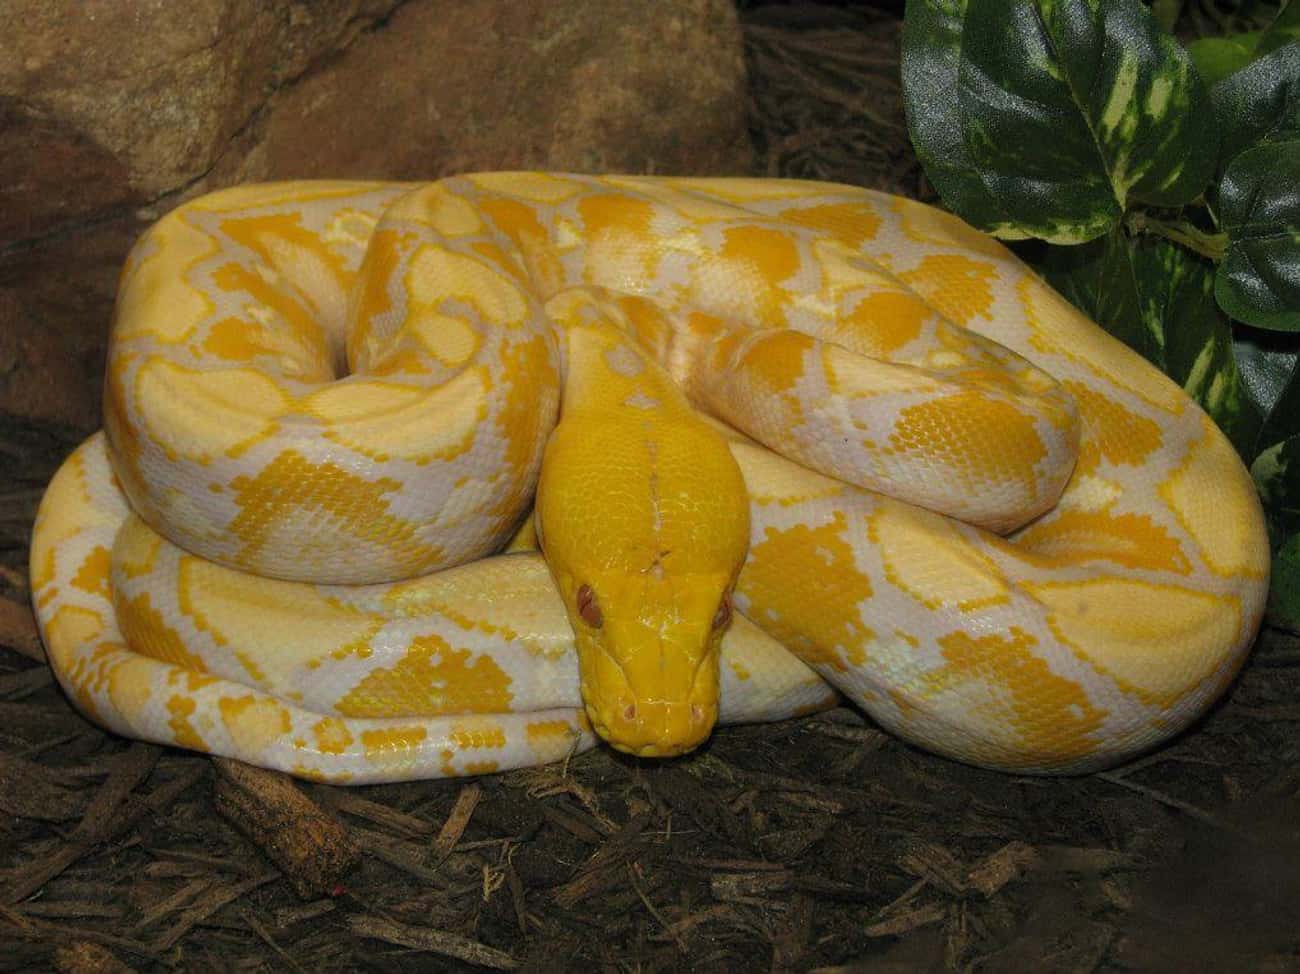 Many Snakes Claimed To Be Banana – But None Actually Were